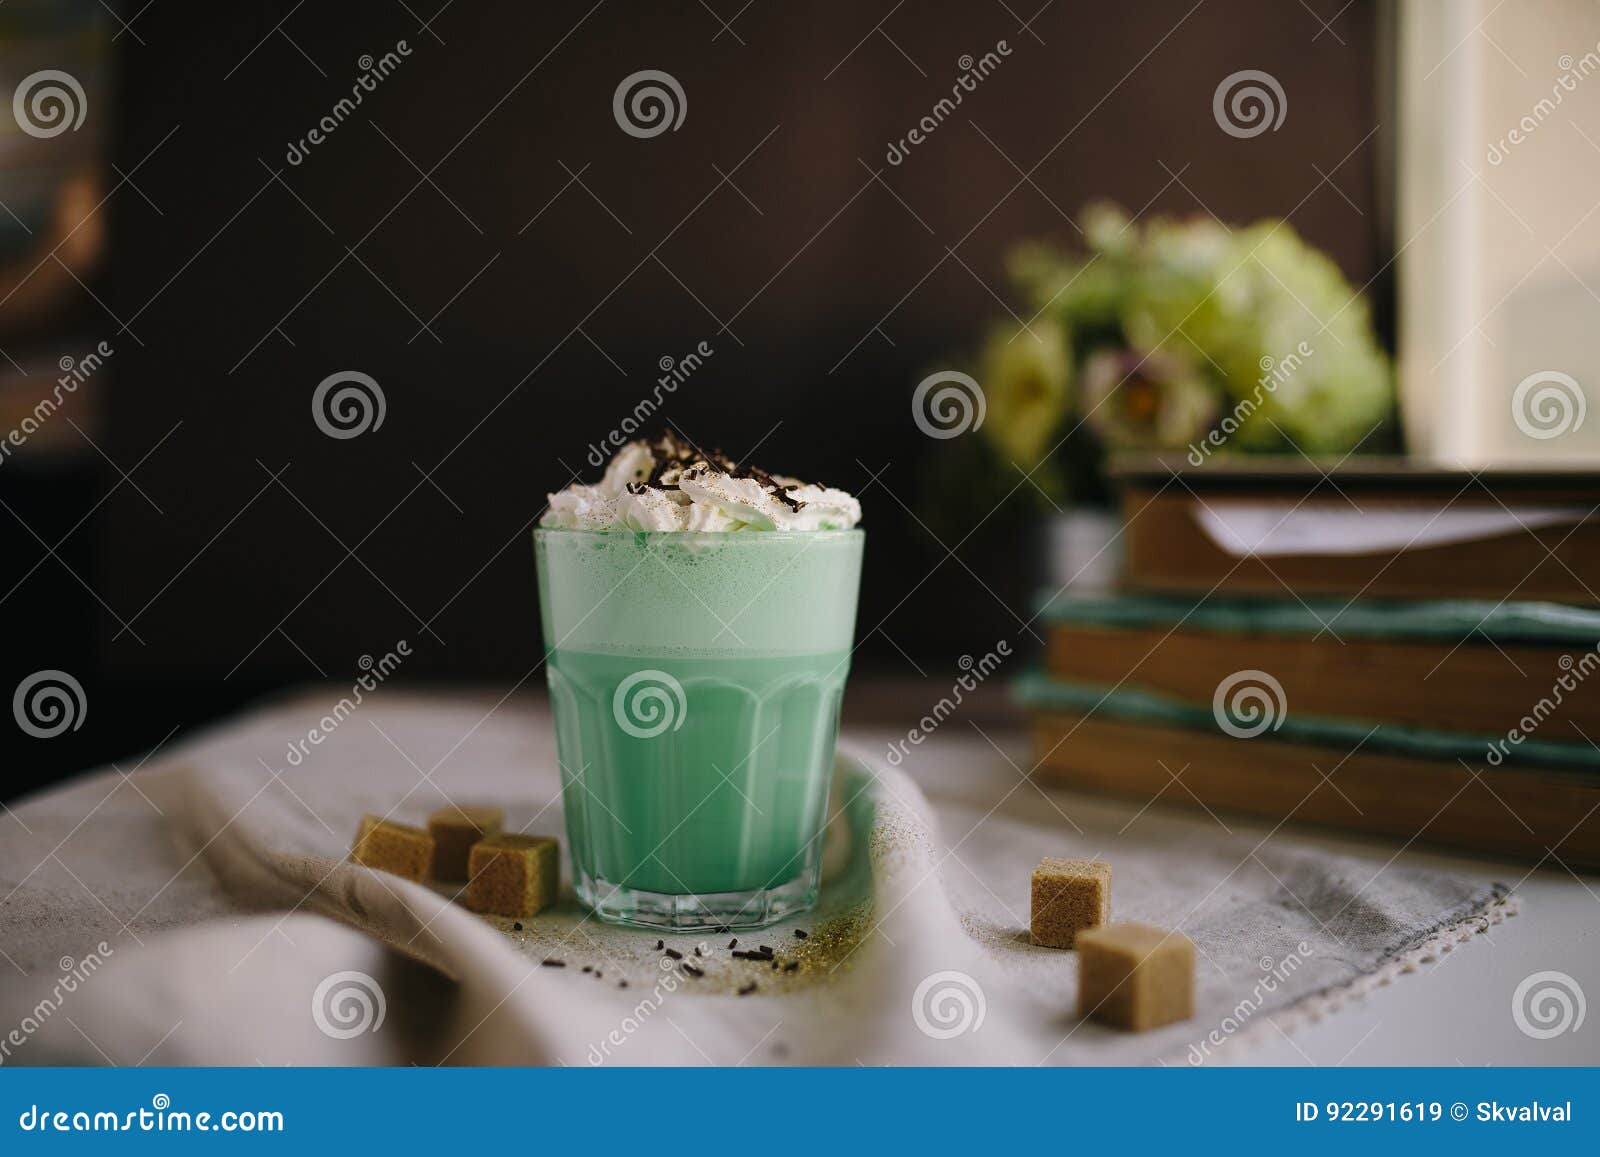 mint coffee with with cream and colorful decoration on dark background. milk shake, cocktaill, frappuccino. unicorn coffee, unico